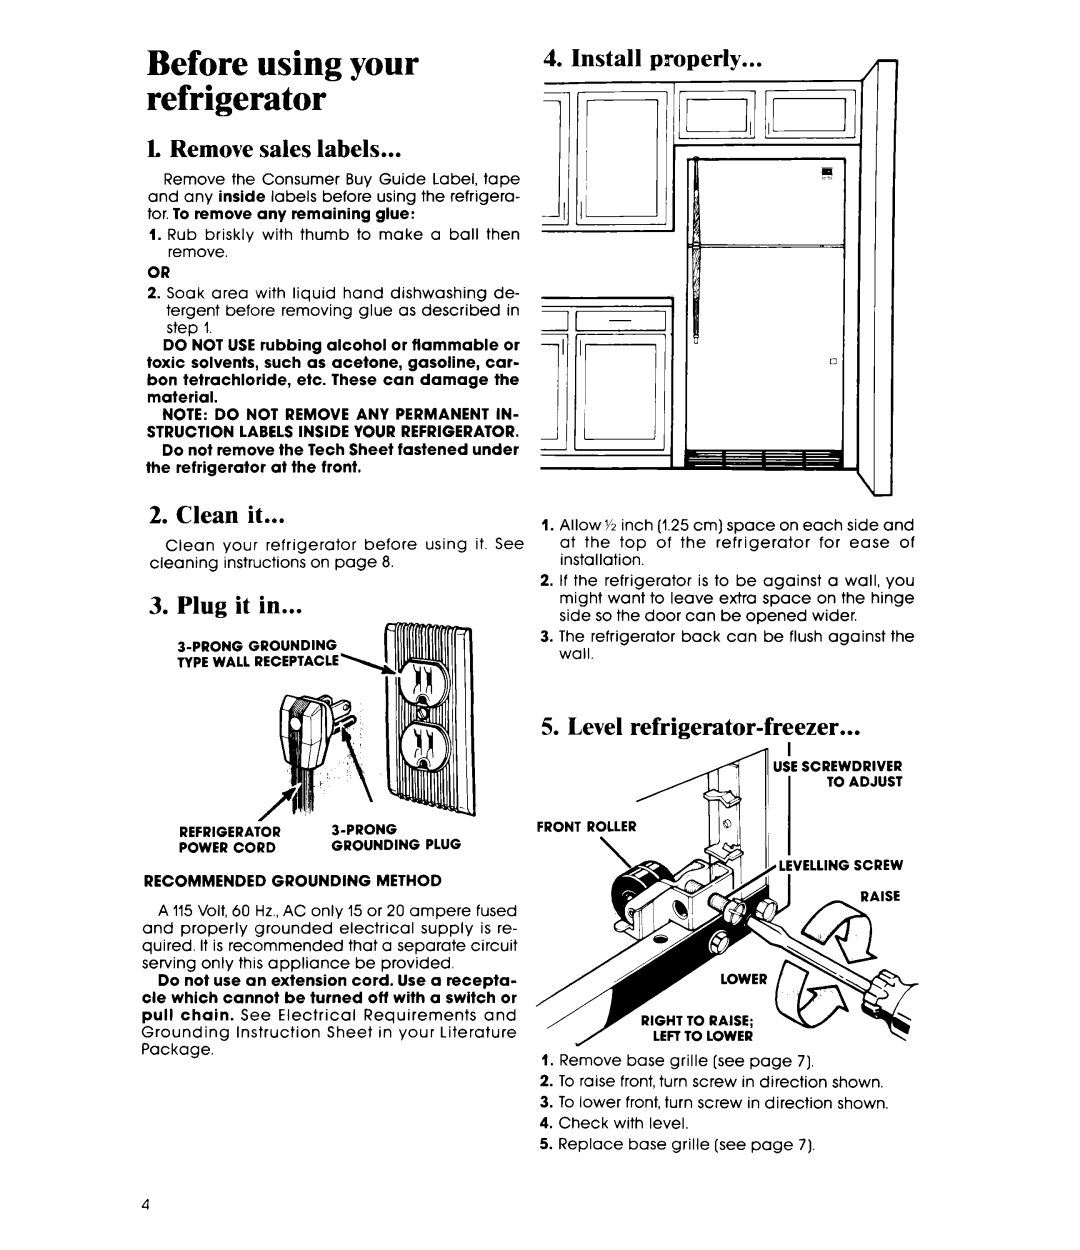 Whirlpool ETl8AK manual Before using your refrigerator, L Remove sales labels, Clean it, Plug it in, Install properly 